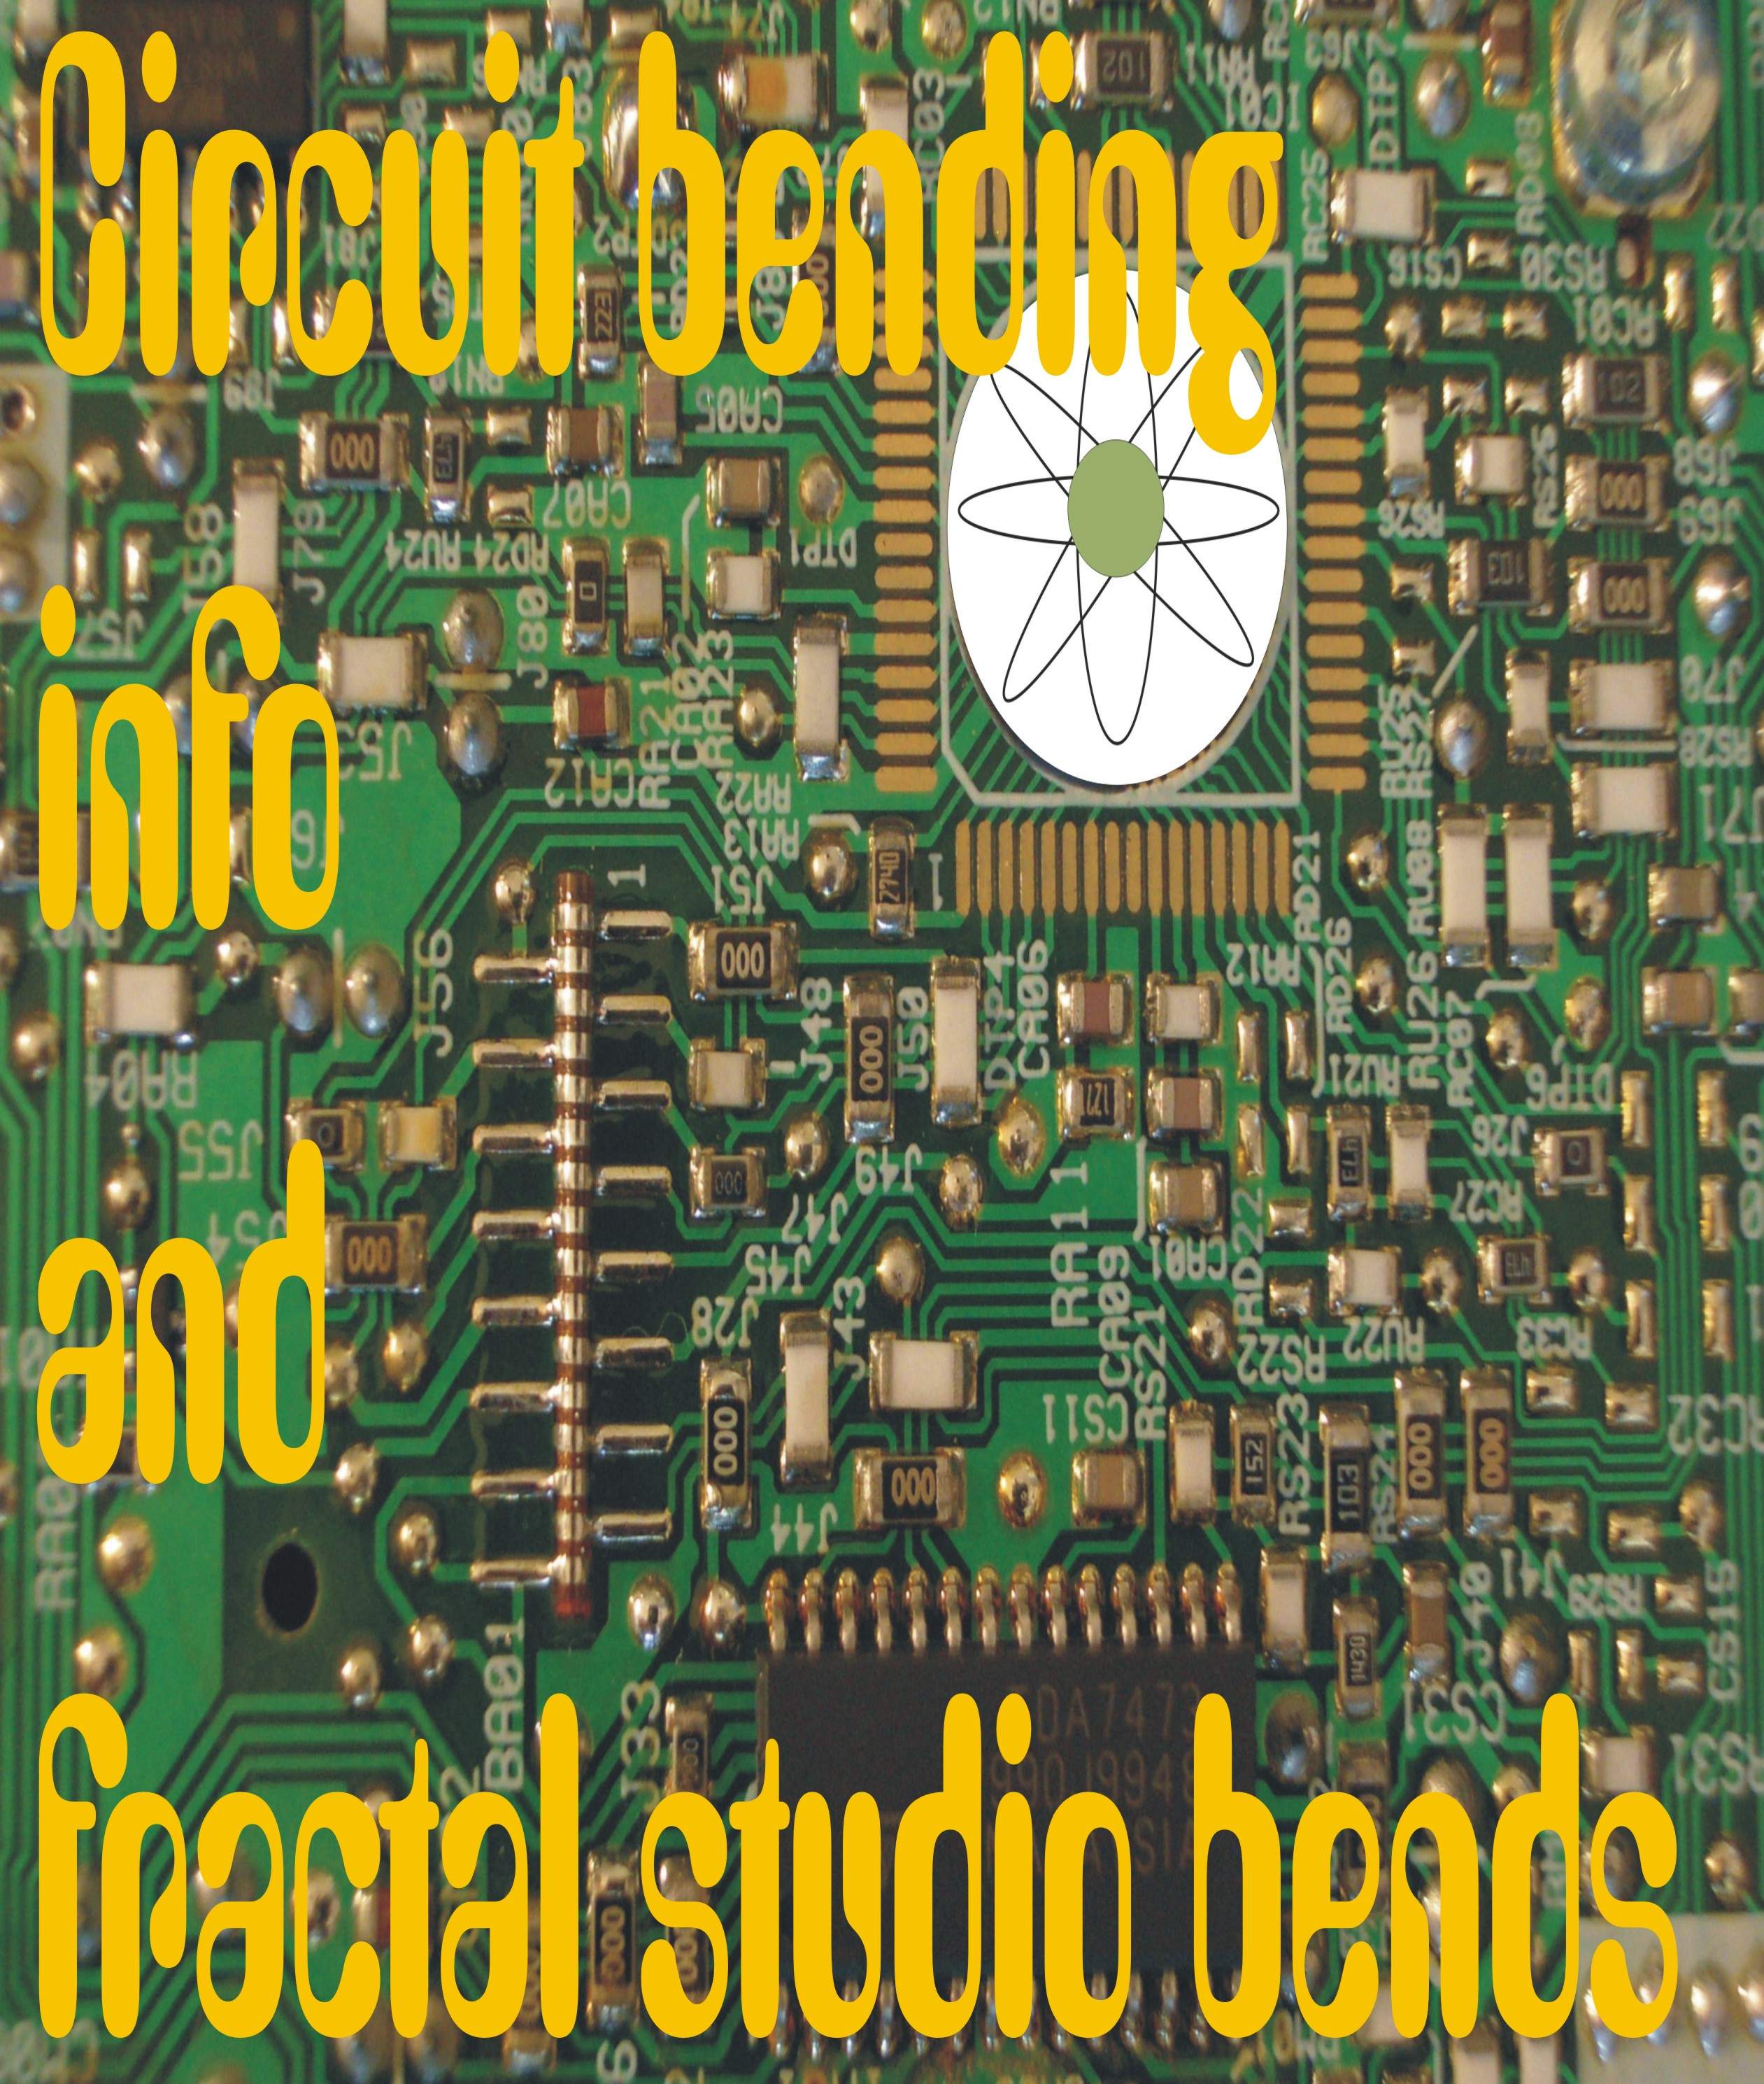 circuit bending info and sounds